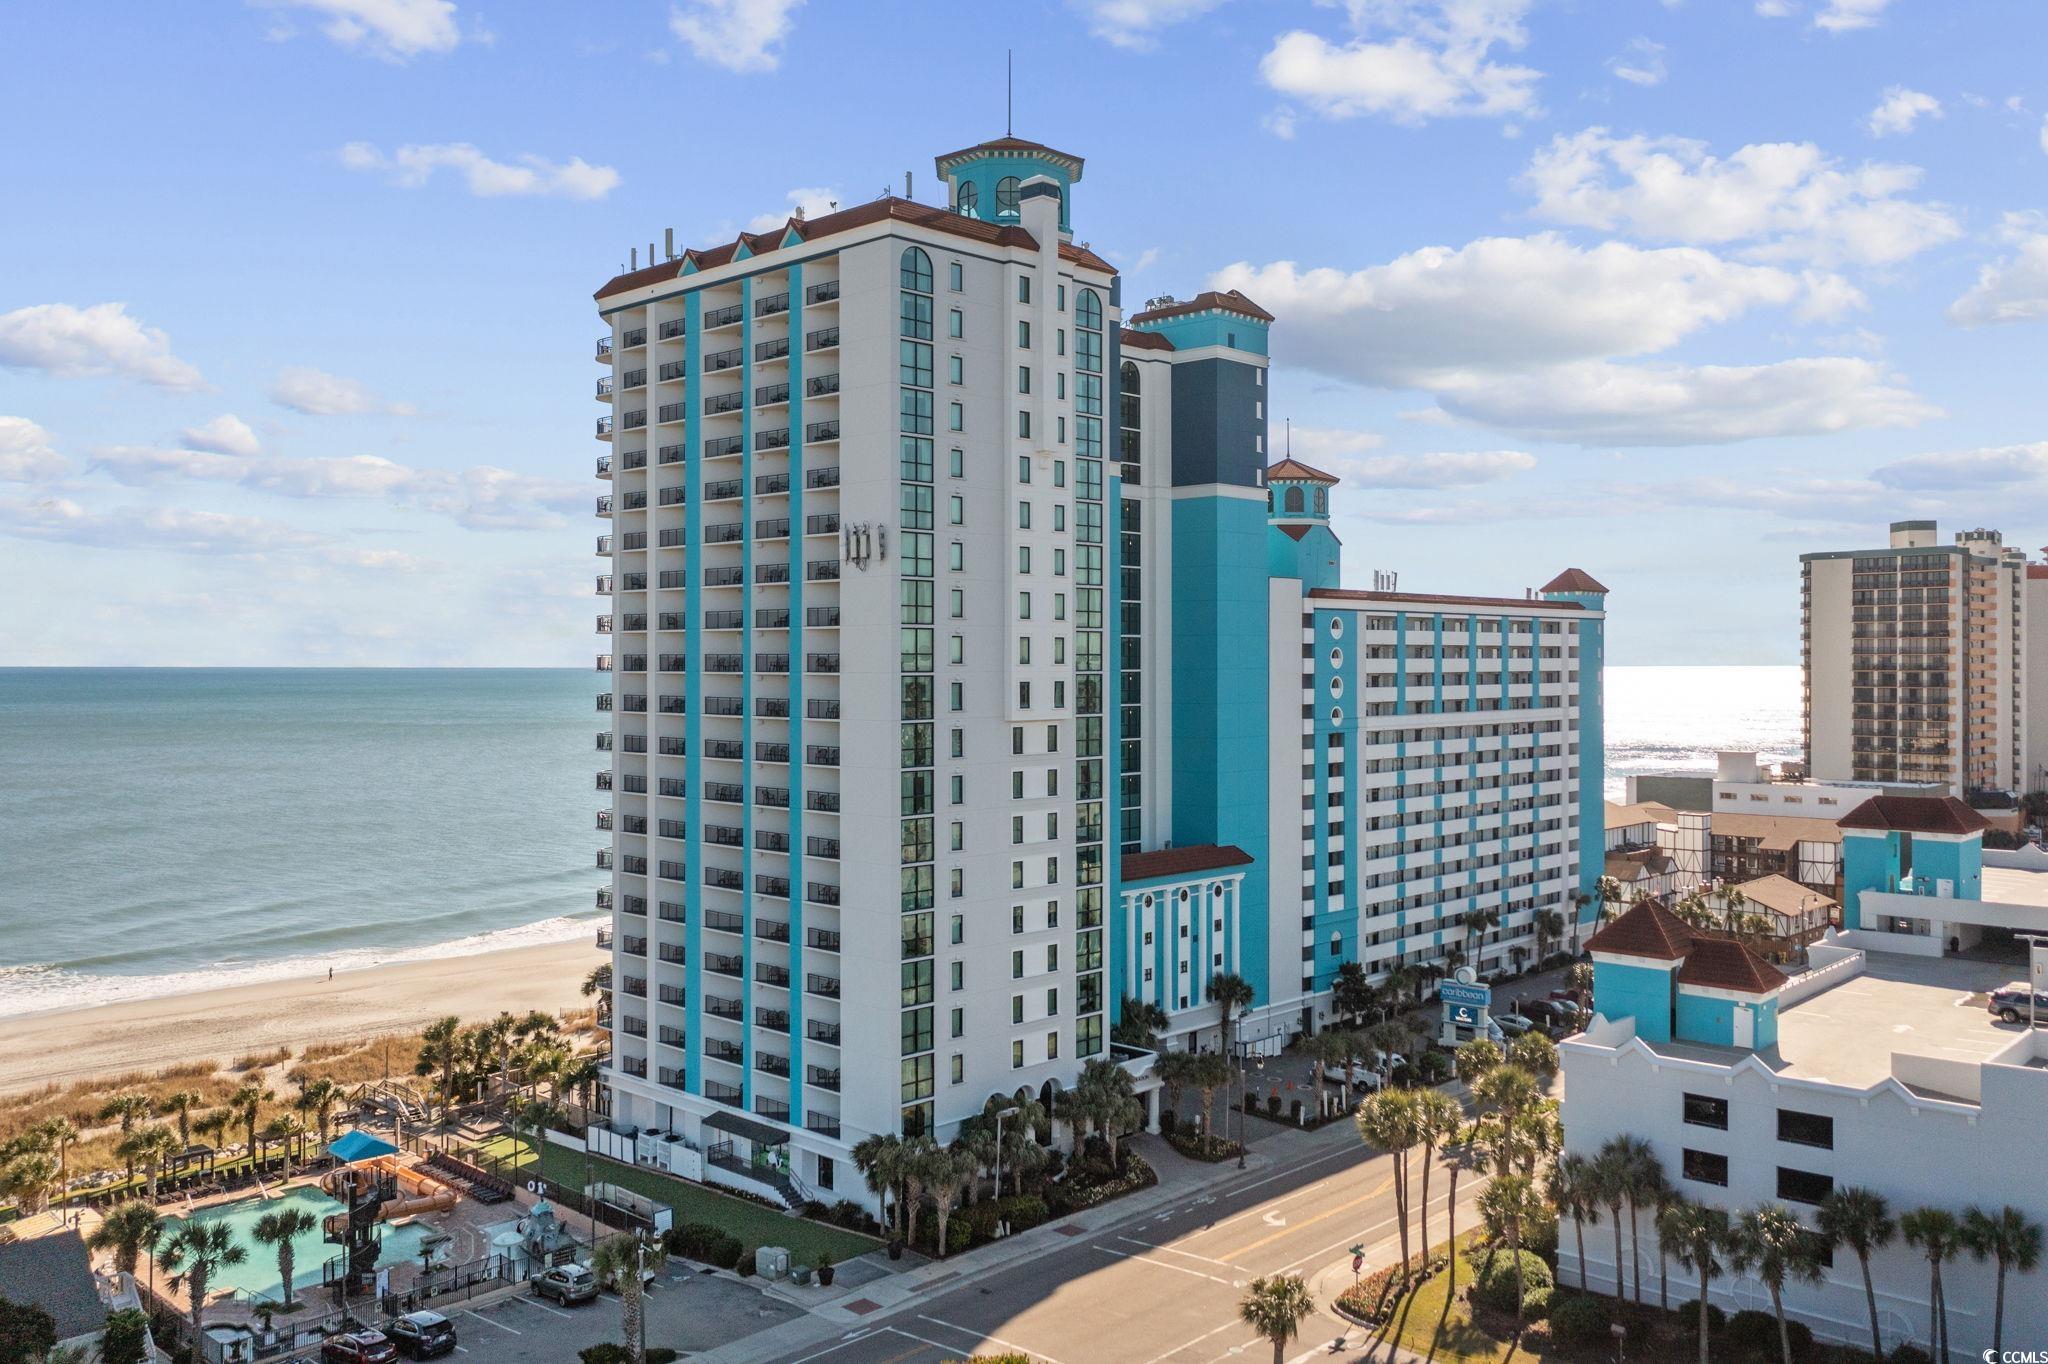 check out the stunning views in this 7th floor direct oceanfront unit at the highly sought after caribbean resort in myrtle beach! this rental machine can fill up your pocket quickly and also provide your family an incredible place to spend time as you wish soaking up the sun along the grand strand! all furnishings will convey with the sale! there are so many amenities available to you and your guests. indoor pools, outdoor pools, tiki bars, multiple lazy rivers, jacuzzi hot tubs, and even a starbucks across the street which is always a huge plus! located in the an excellent central area of myrtle beach nothing it has to offer is out of reach. come check out this beautiful view before it's gone and enjoy it all year long!